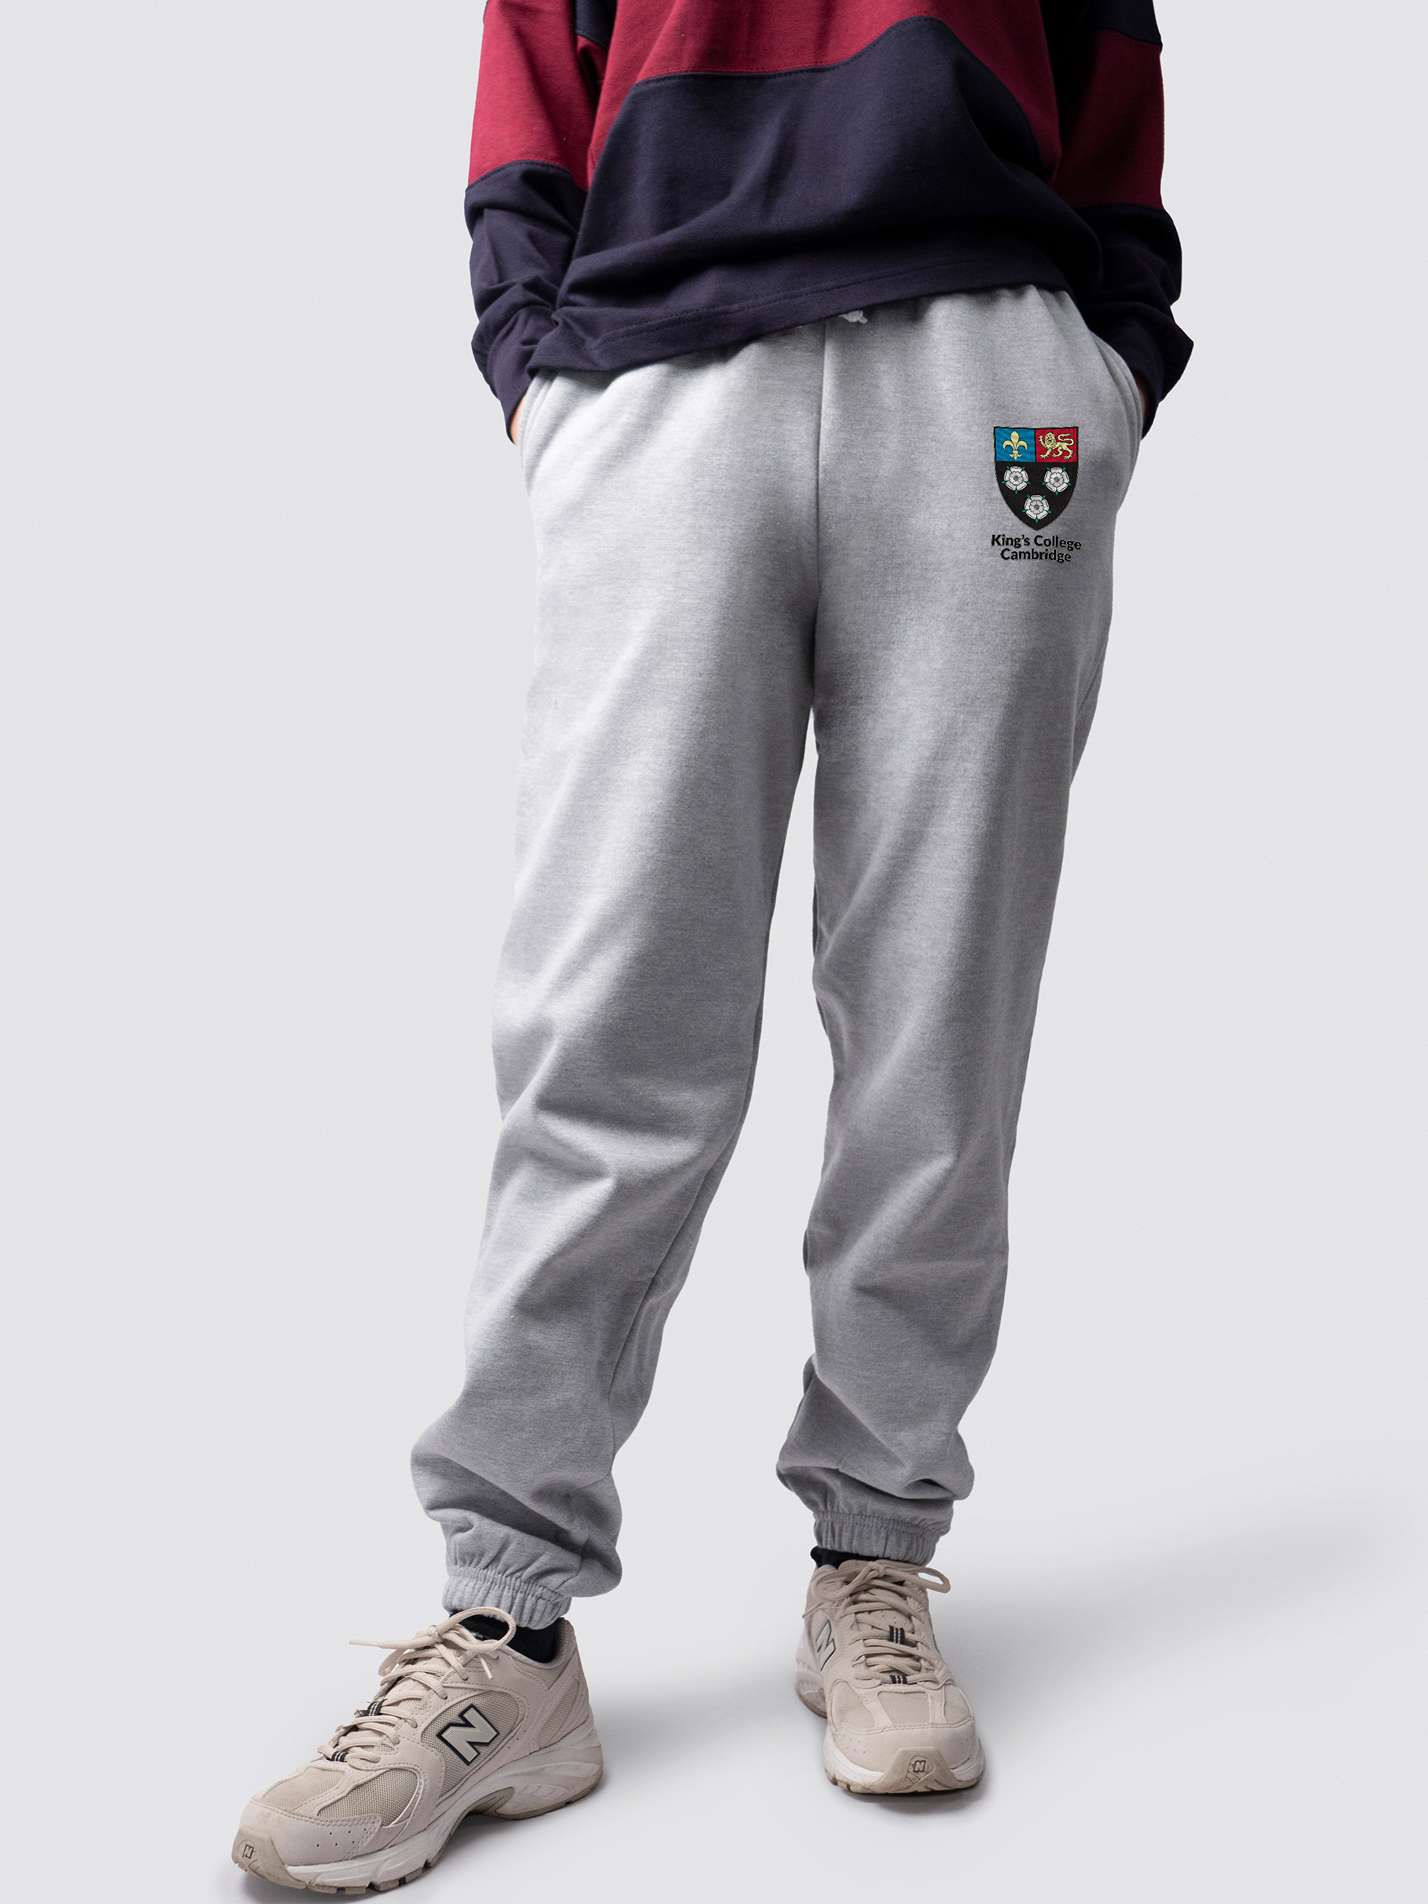 undergraduate cuffed sweatpants, made from soft cotton fabric, with King's logo